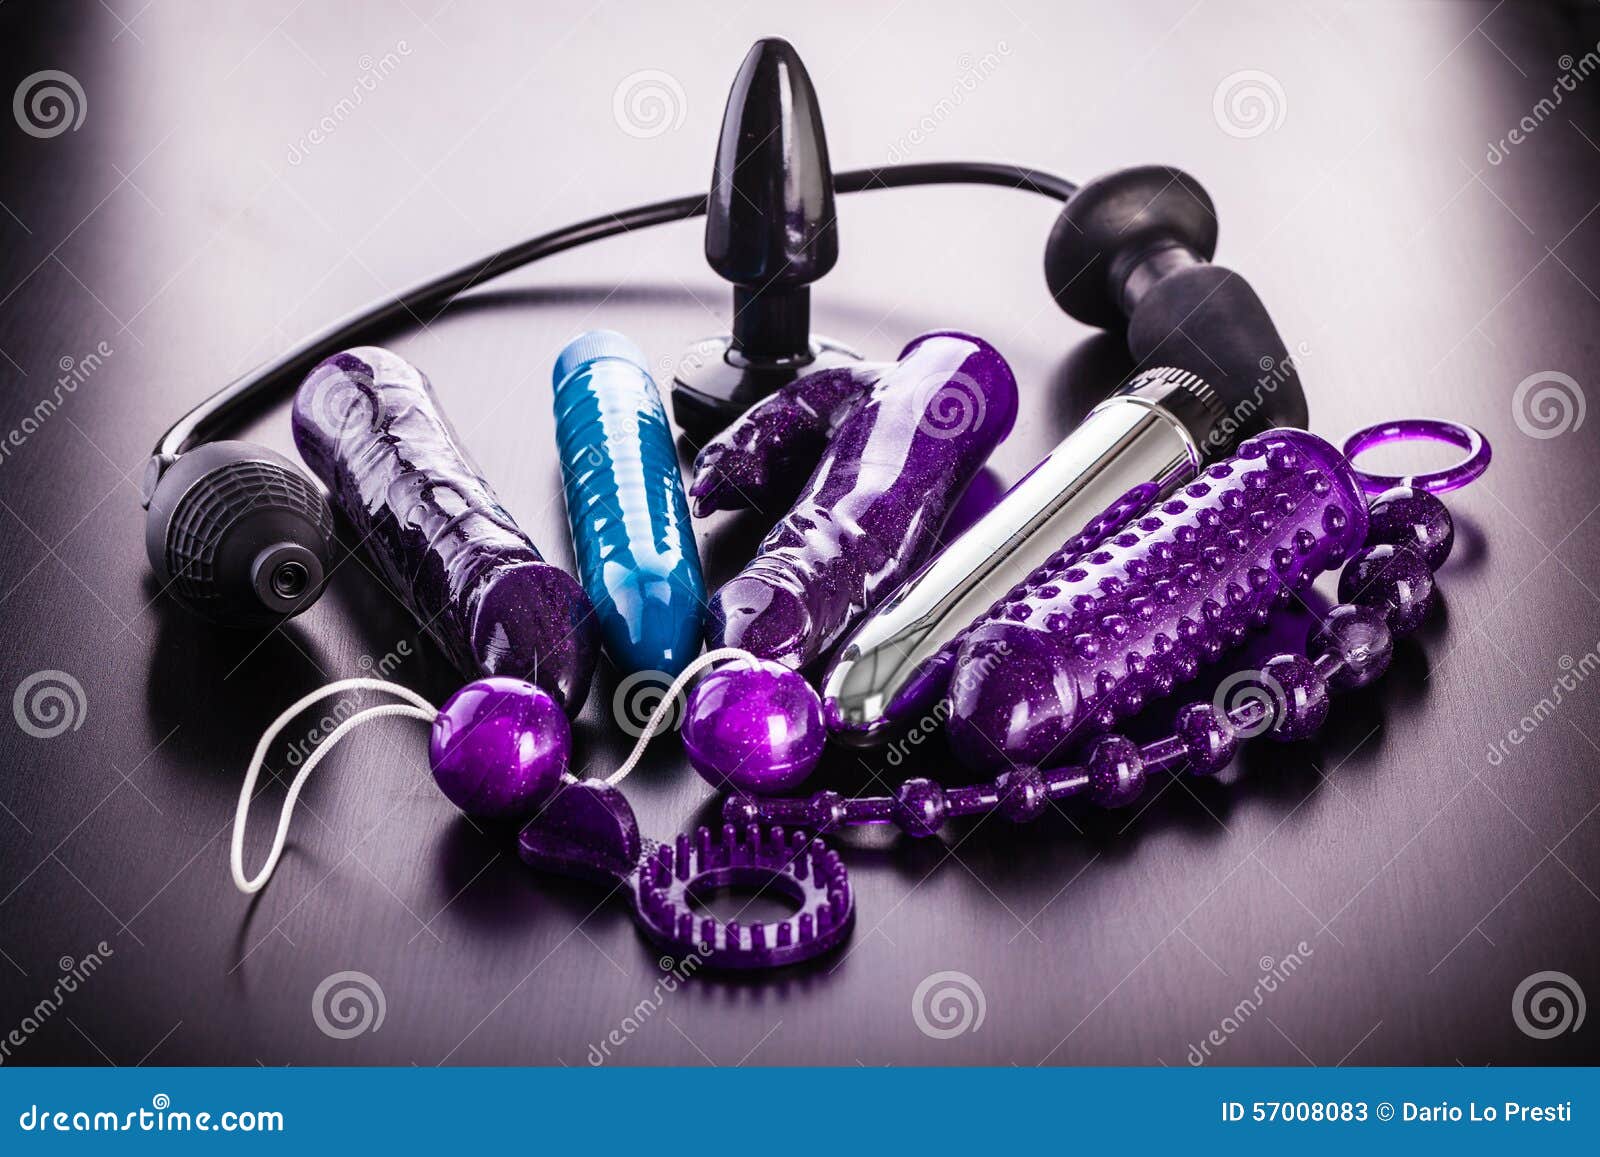 Kinky sex toys stock image. Image of assortment, penis - 57008083